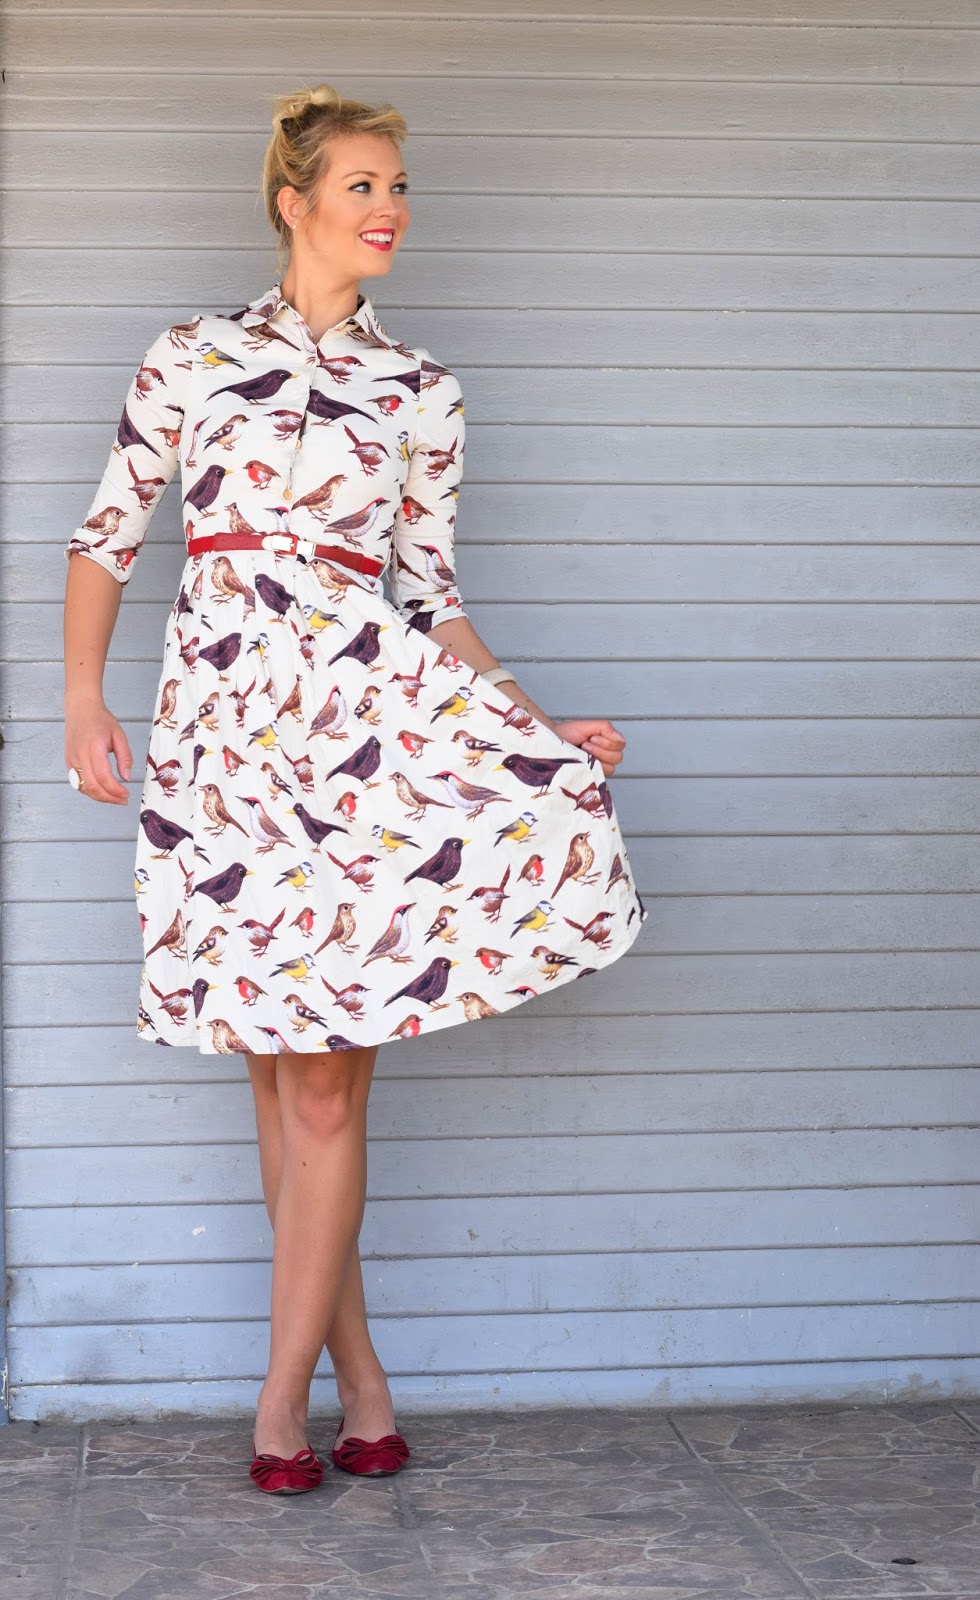 german blondy, why you should wear printed dresses, print dress, bird dress, zaful dress, bird, maxi dress, red dress, red shoes